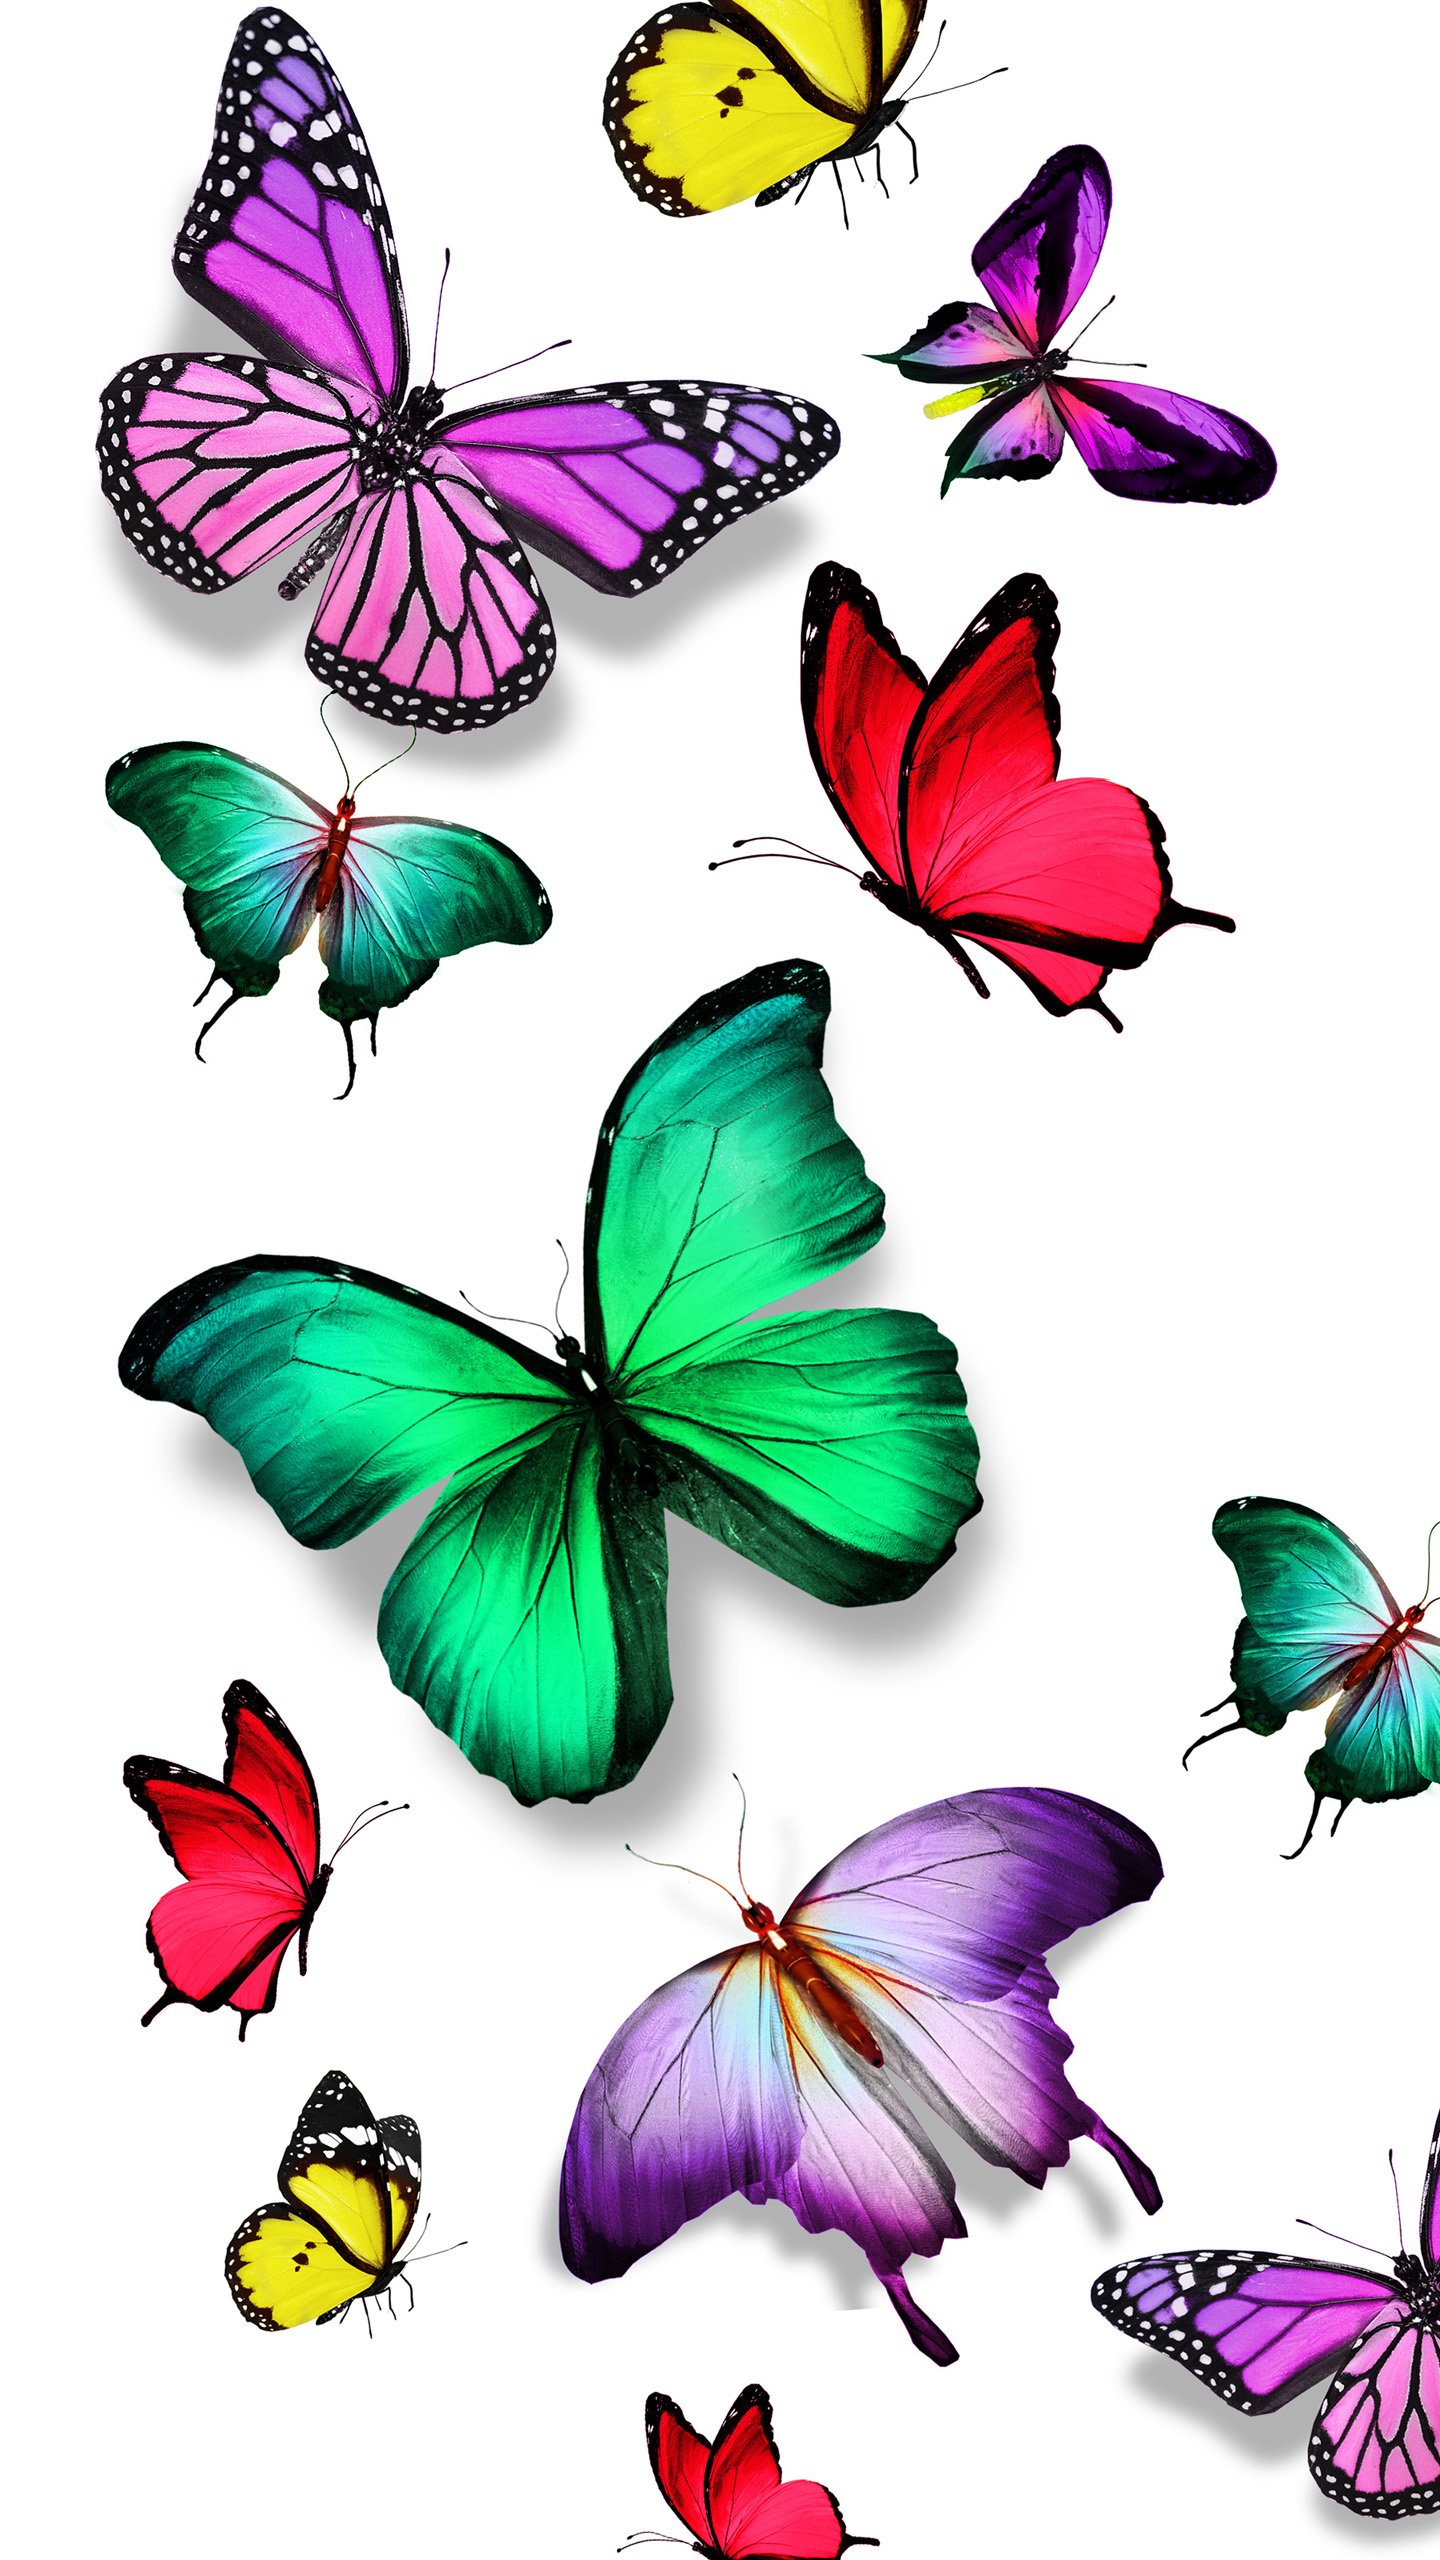 Blue butterfly art Wallpapers Download | MobCup